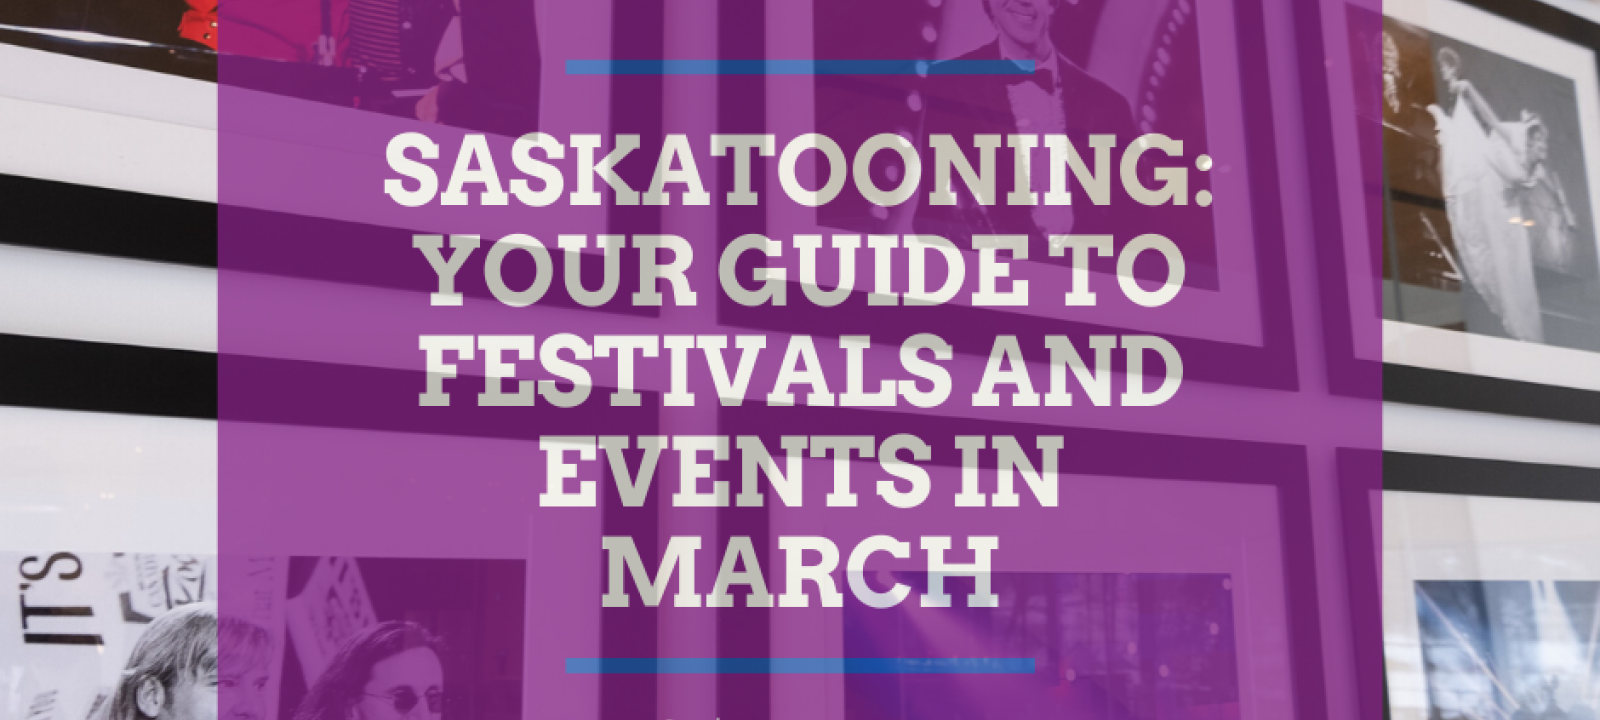 Saskatooning: Your guide to festivals and events in March